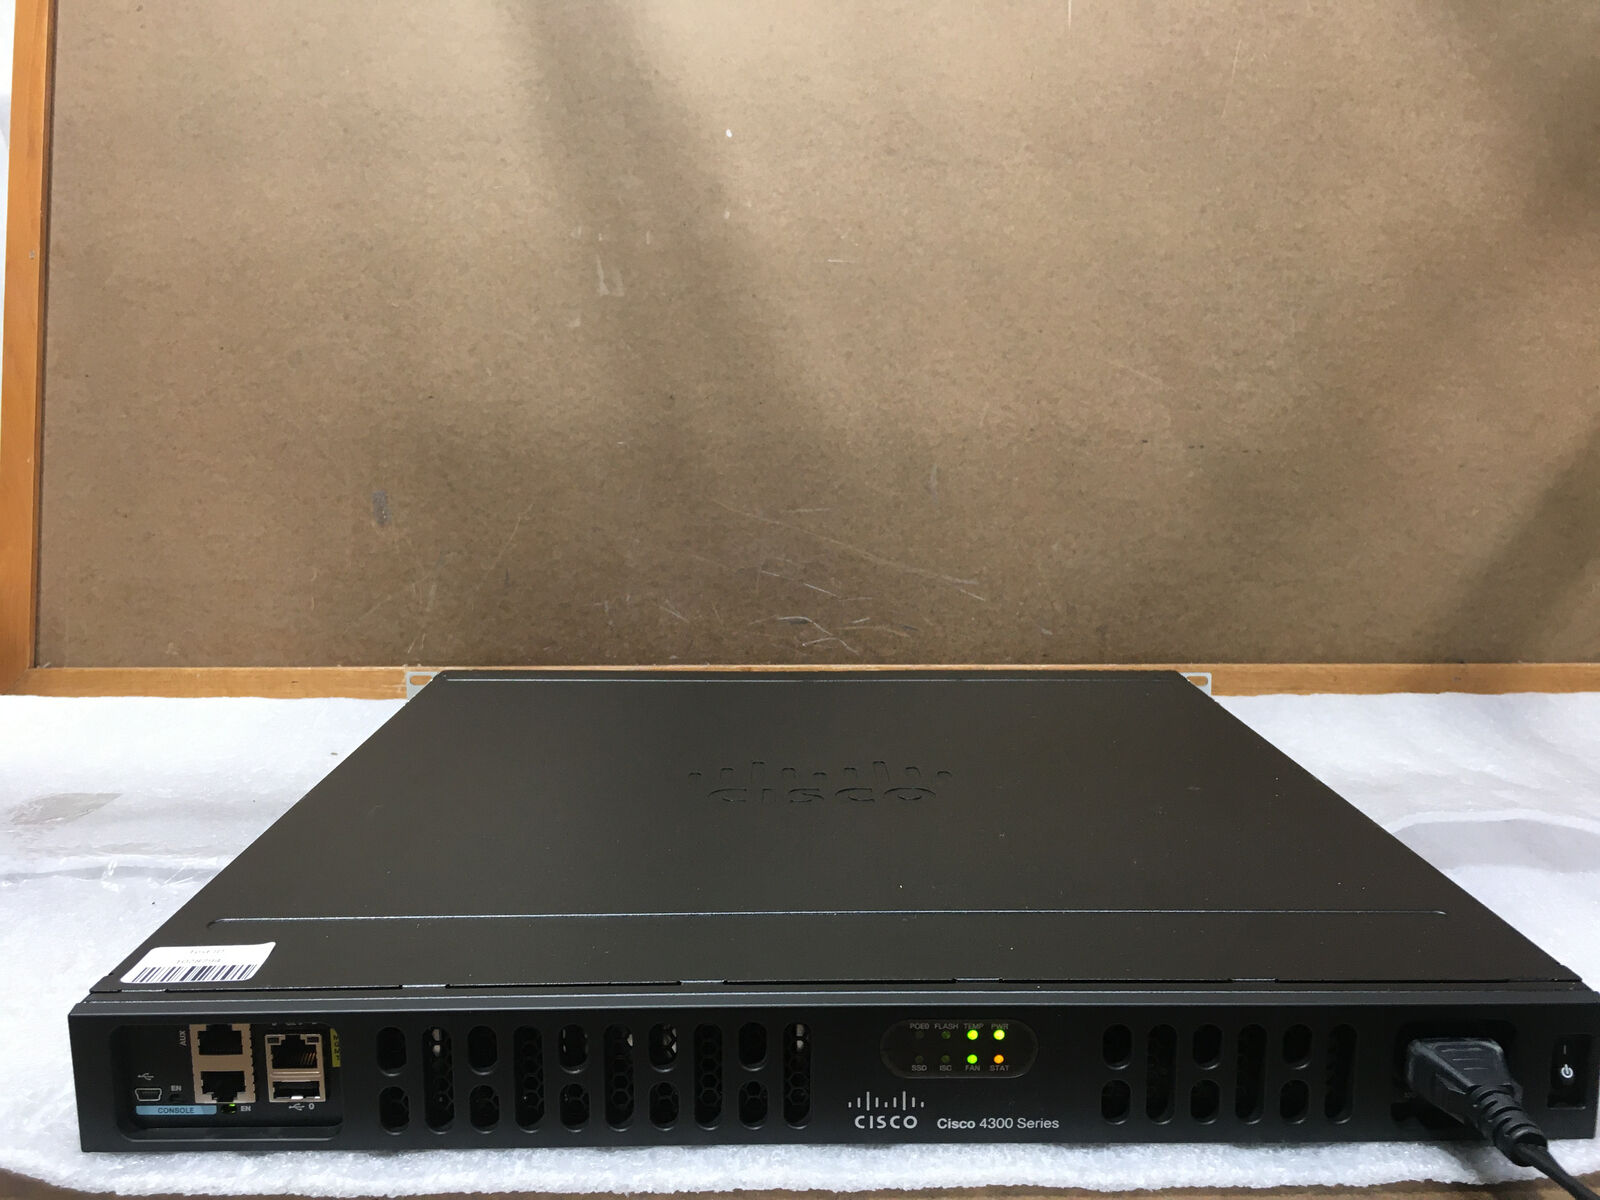 Cisco 4300 Series ISR4331/K9 V06 Integrated Services Router-TESTED/FACTORY-RESET